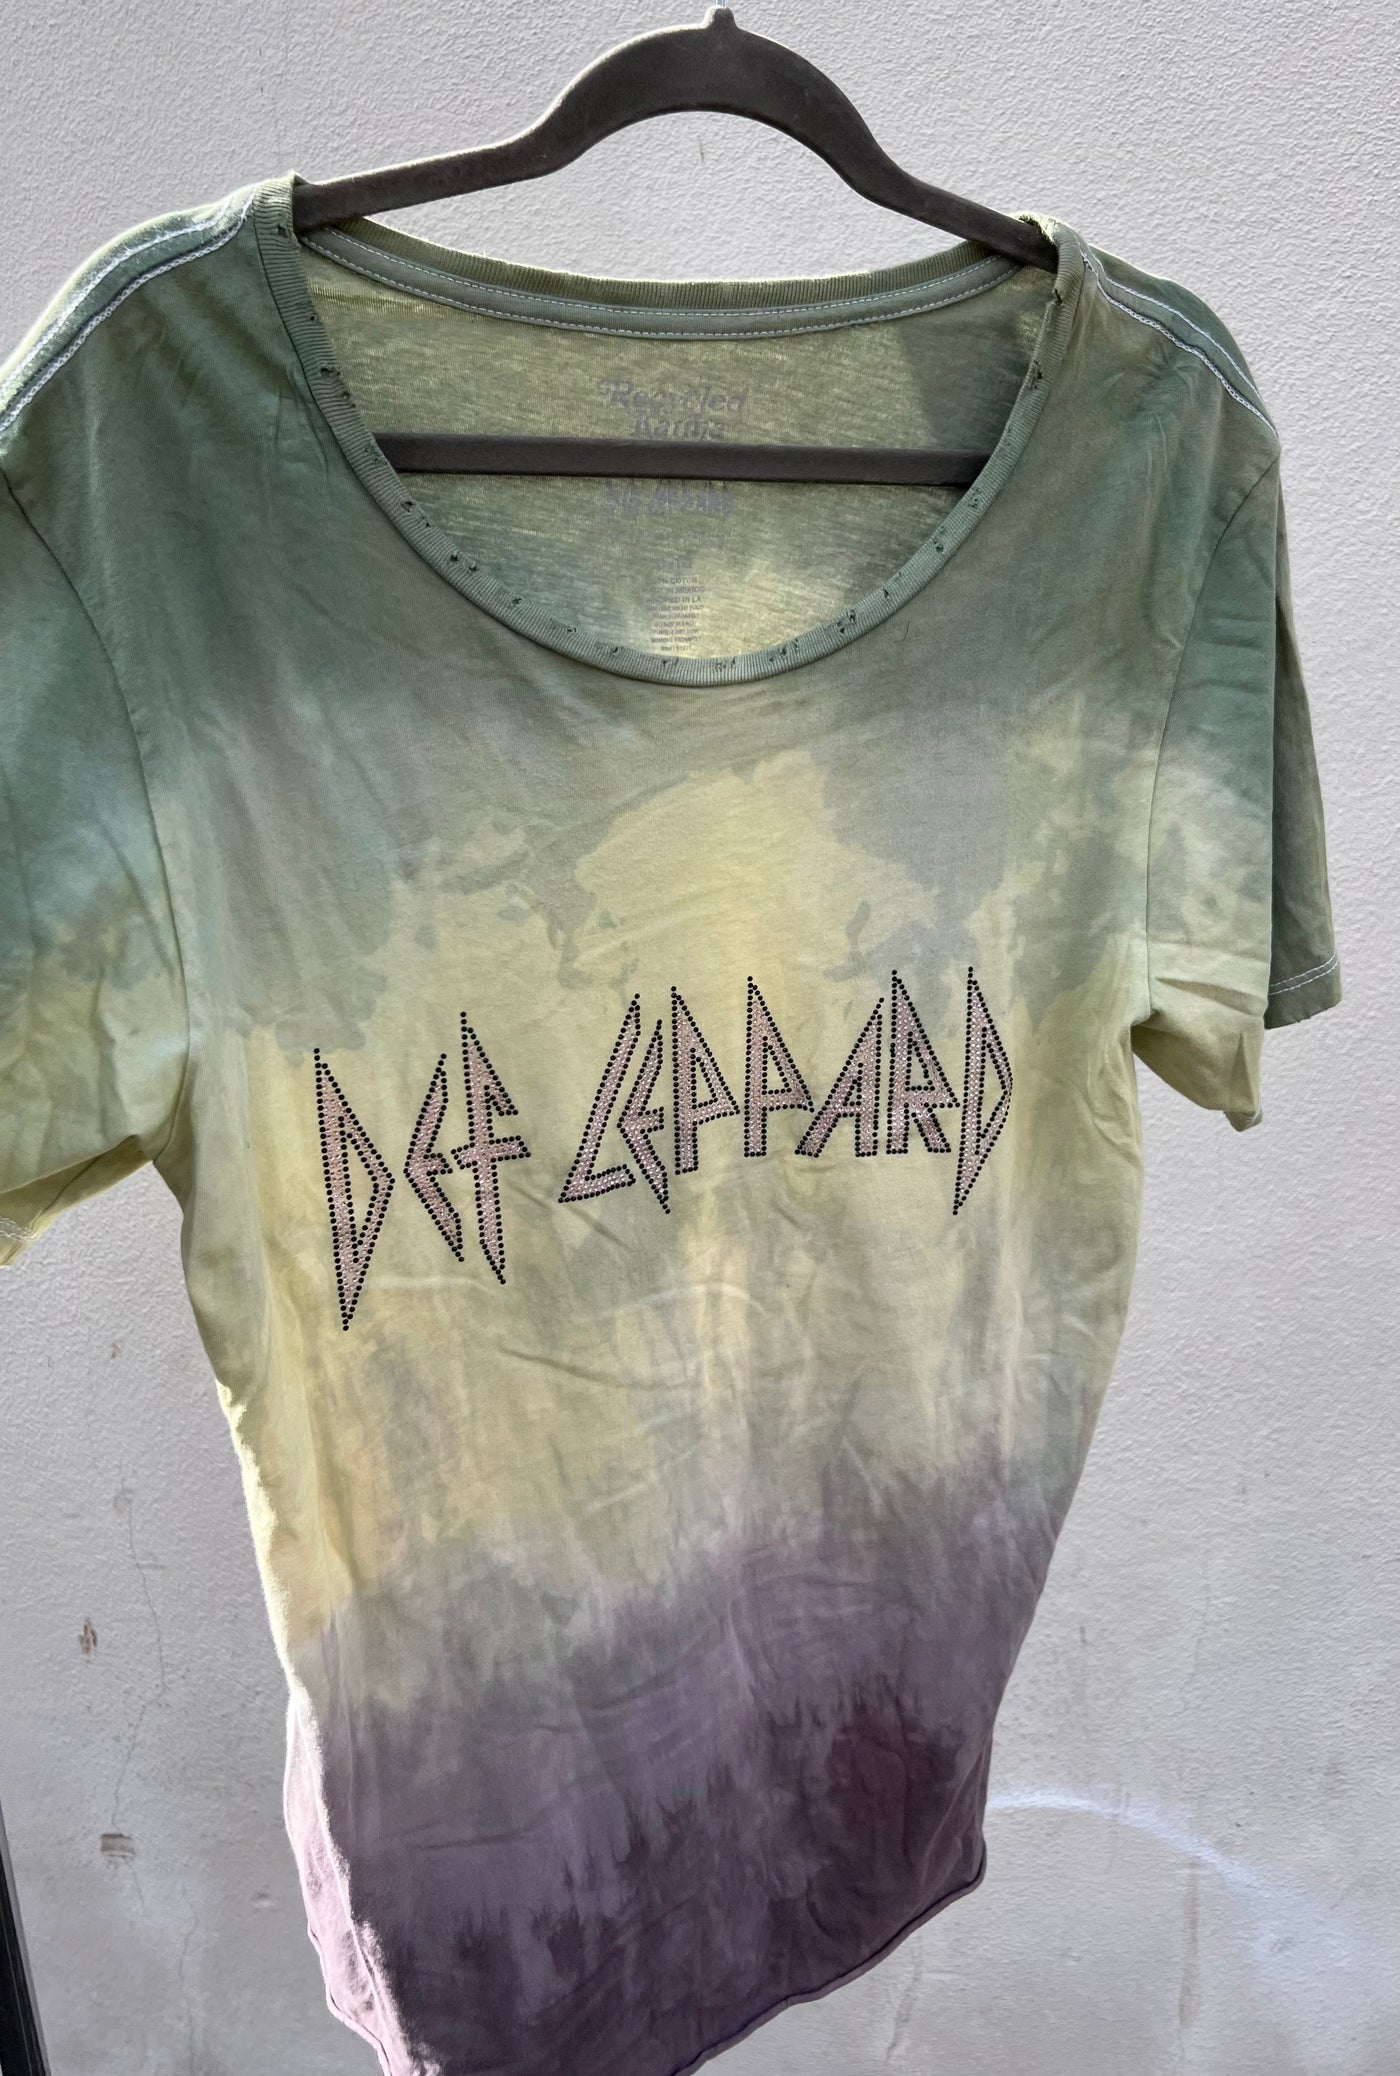 Hand Dyed Dazzled Def Leppard T Shirt